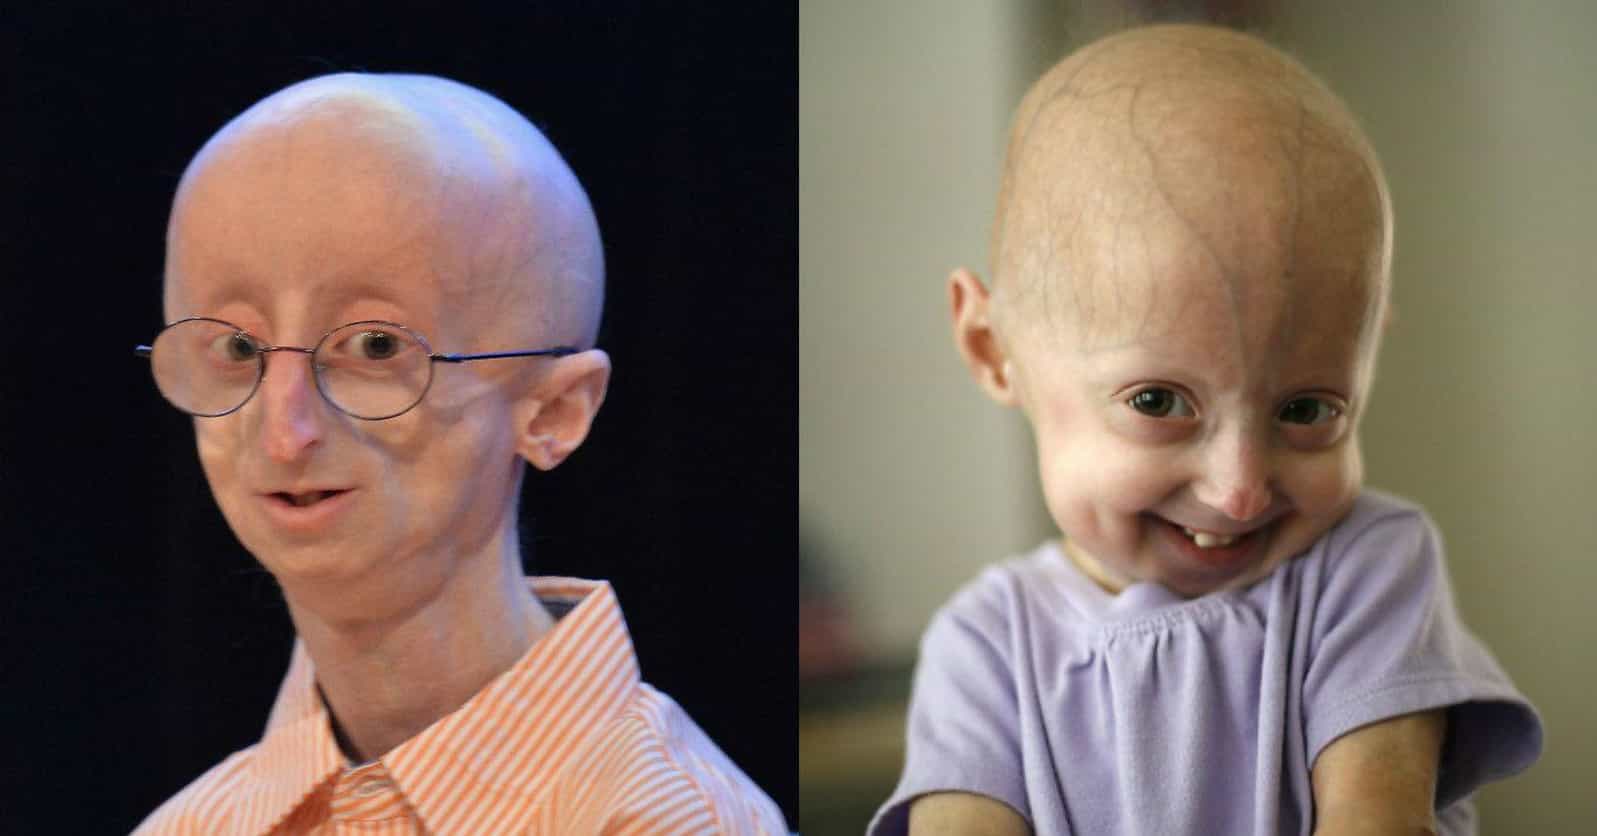 What You Need To Know About Progeria, The Disease That Rapidly Ages Young Kids